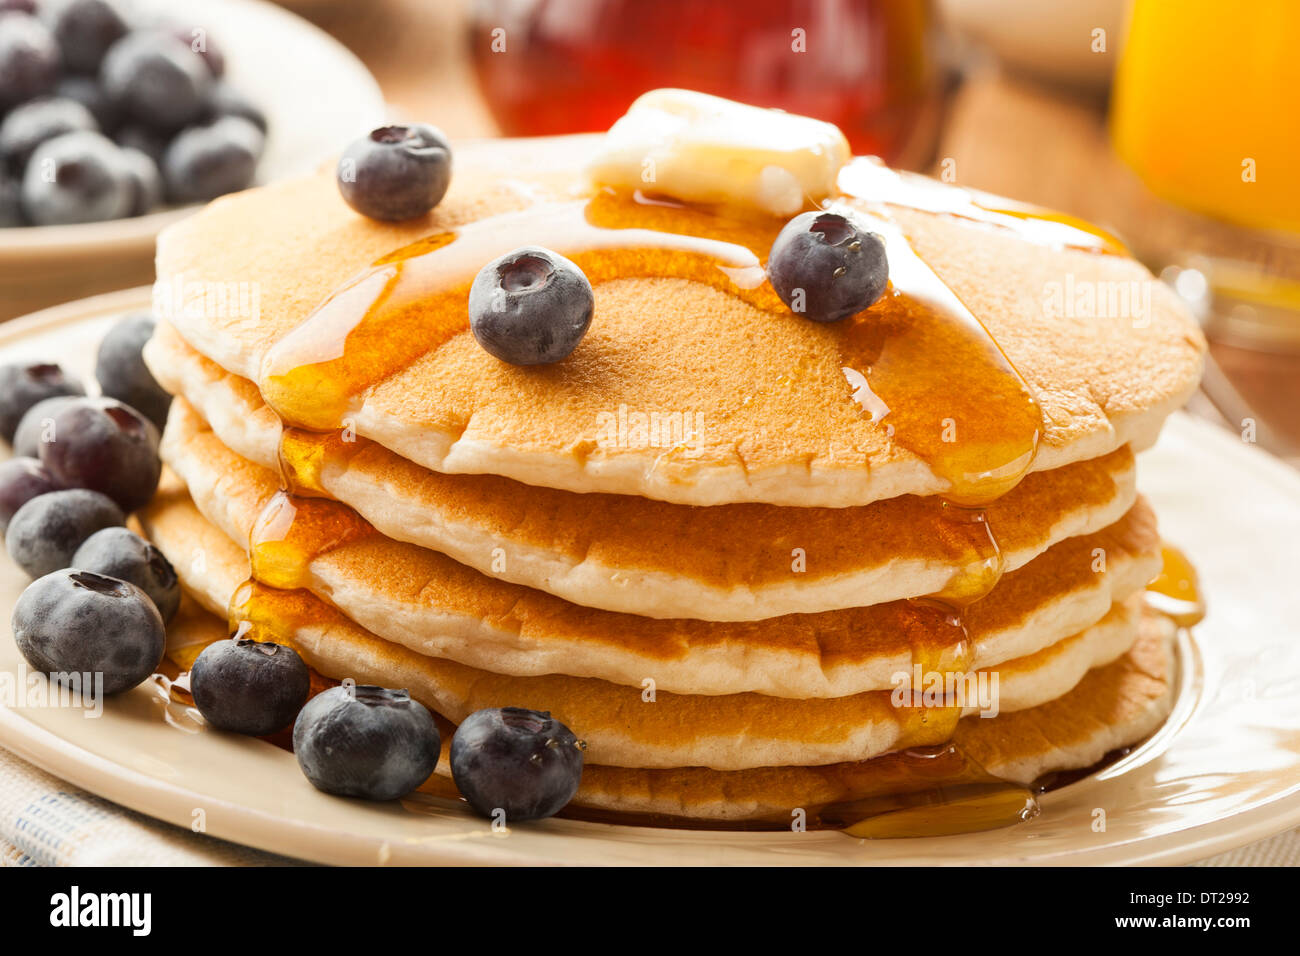 Homemade Buttermilk Pancakes with Blueberries and Syrup for Breakfast Stock Photo